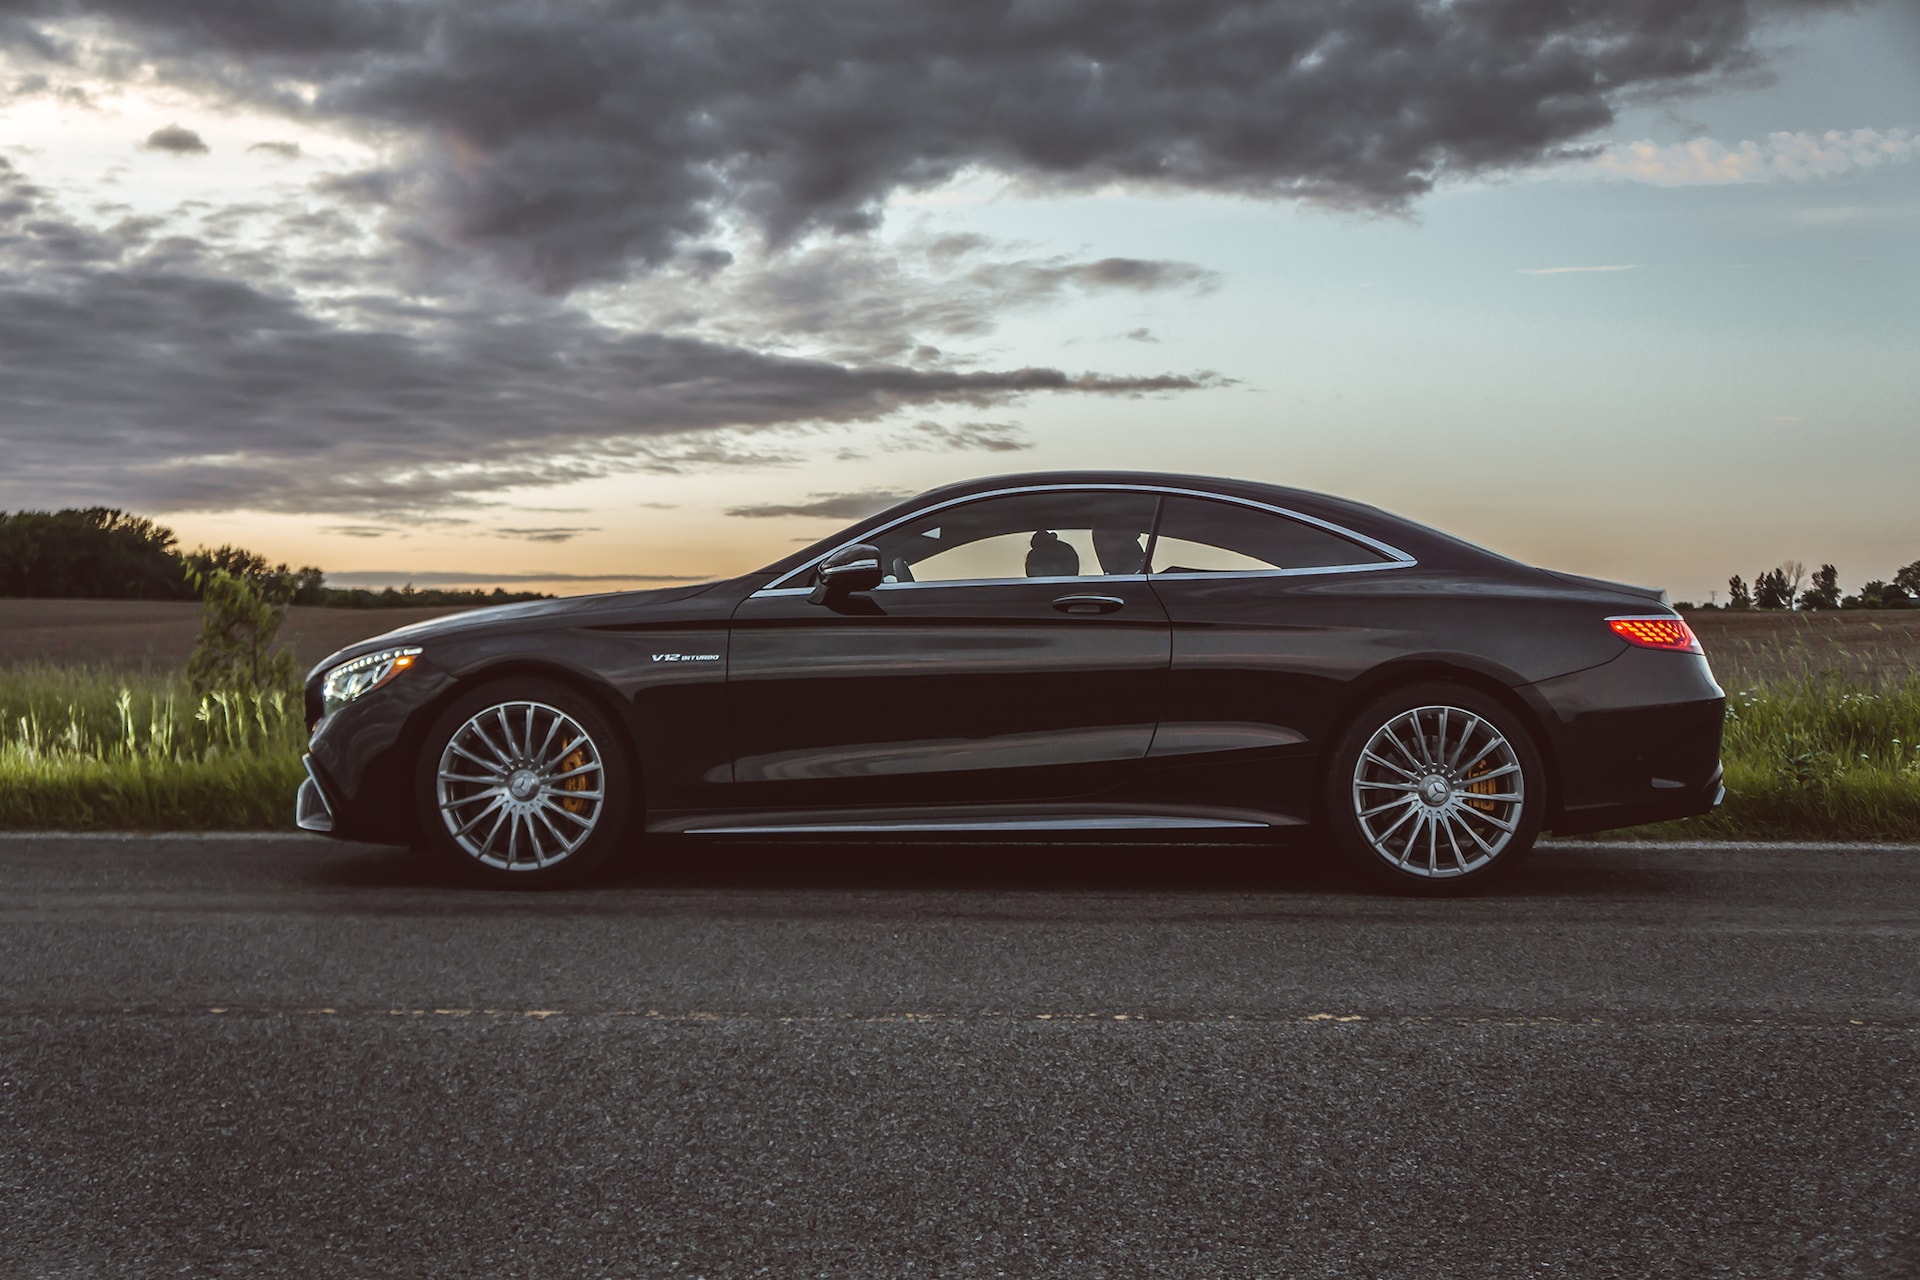 997 Miles in a 2018 Mercedes-AMG S65 Coupe